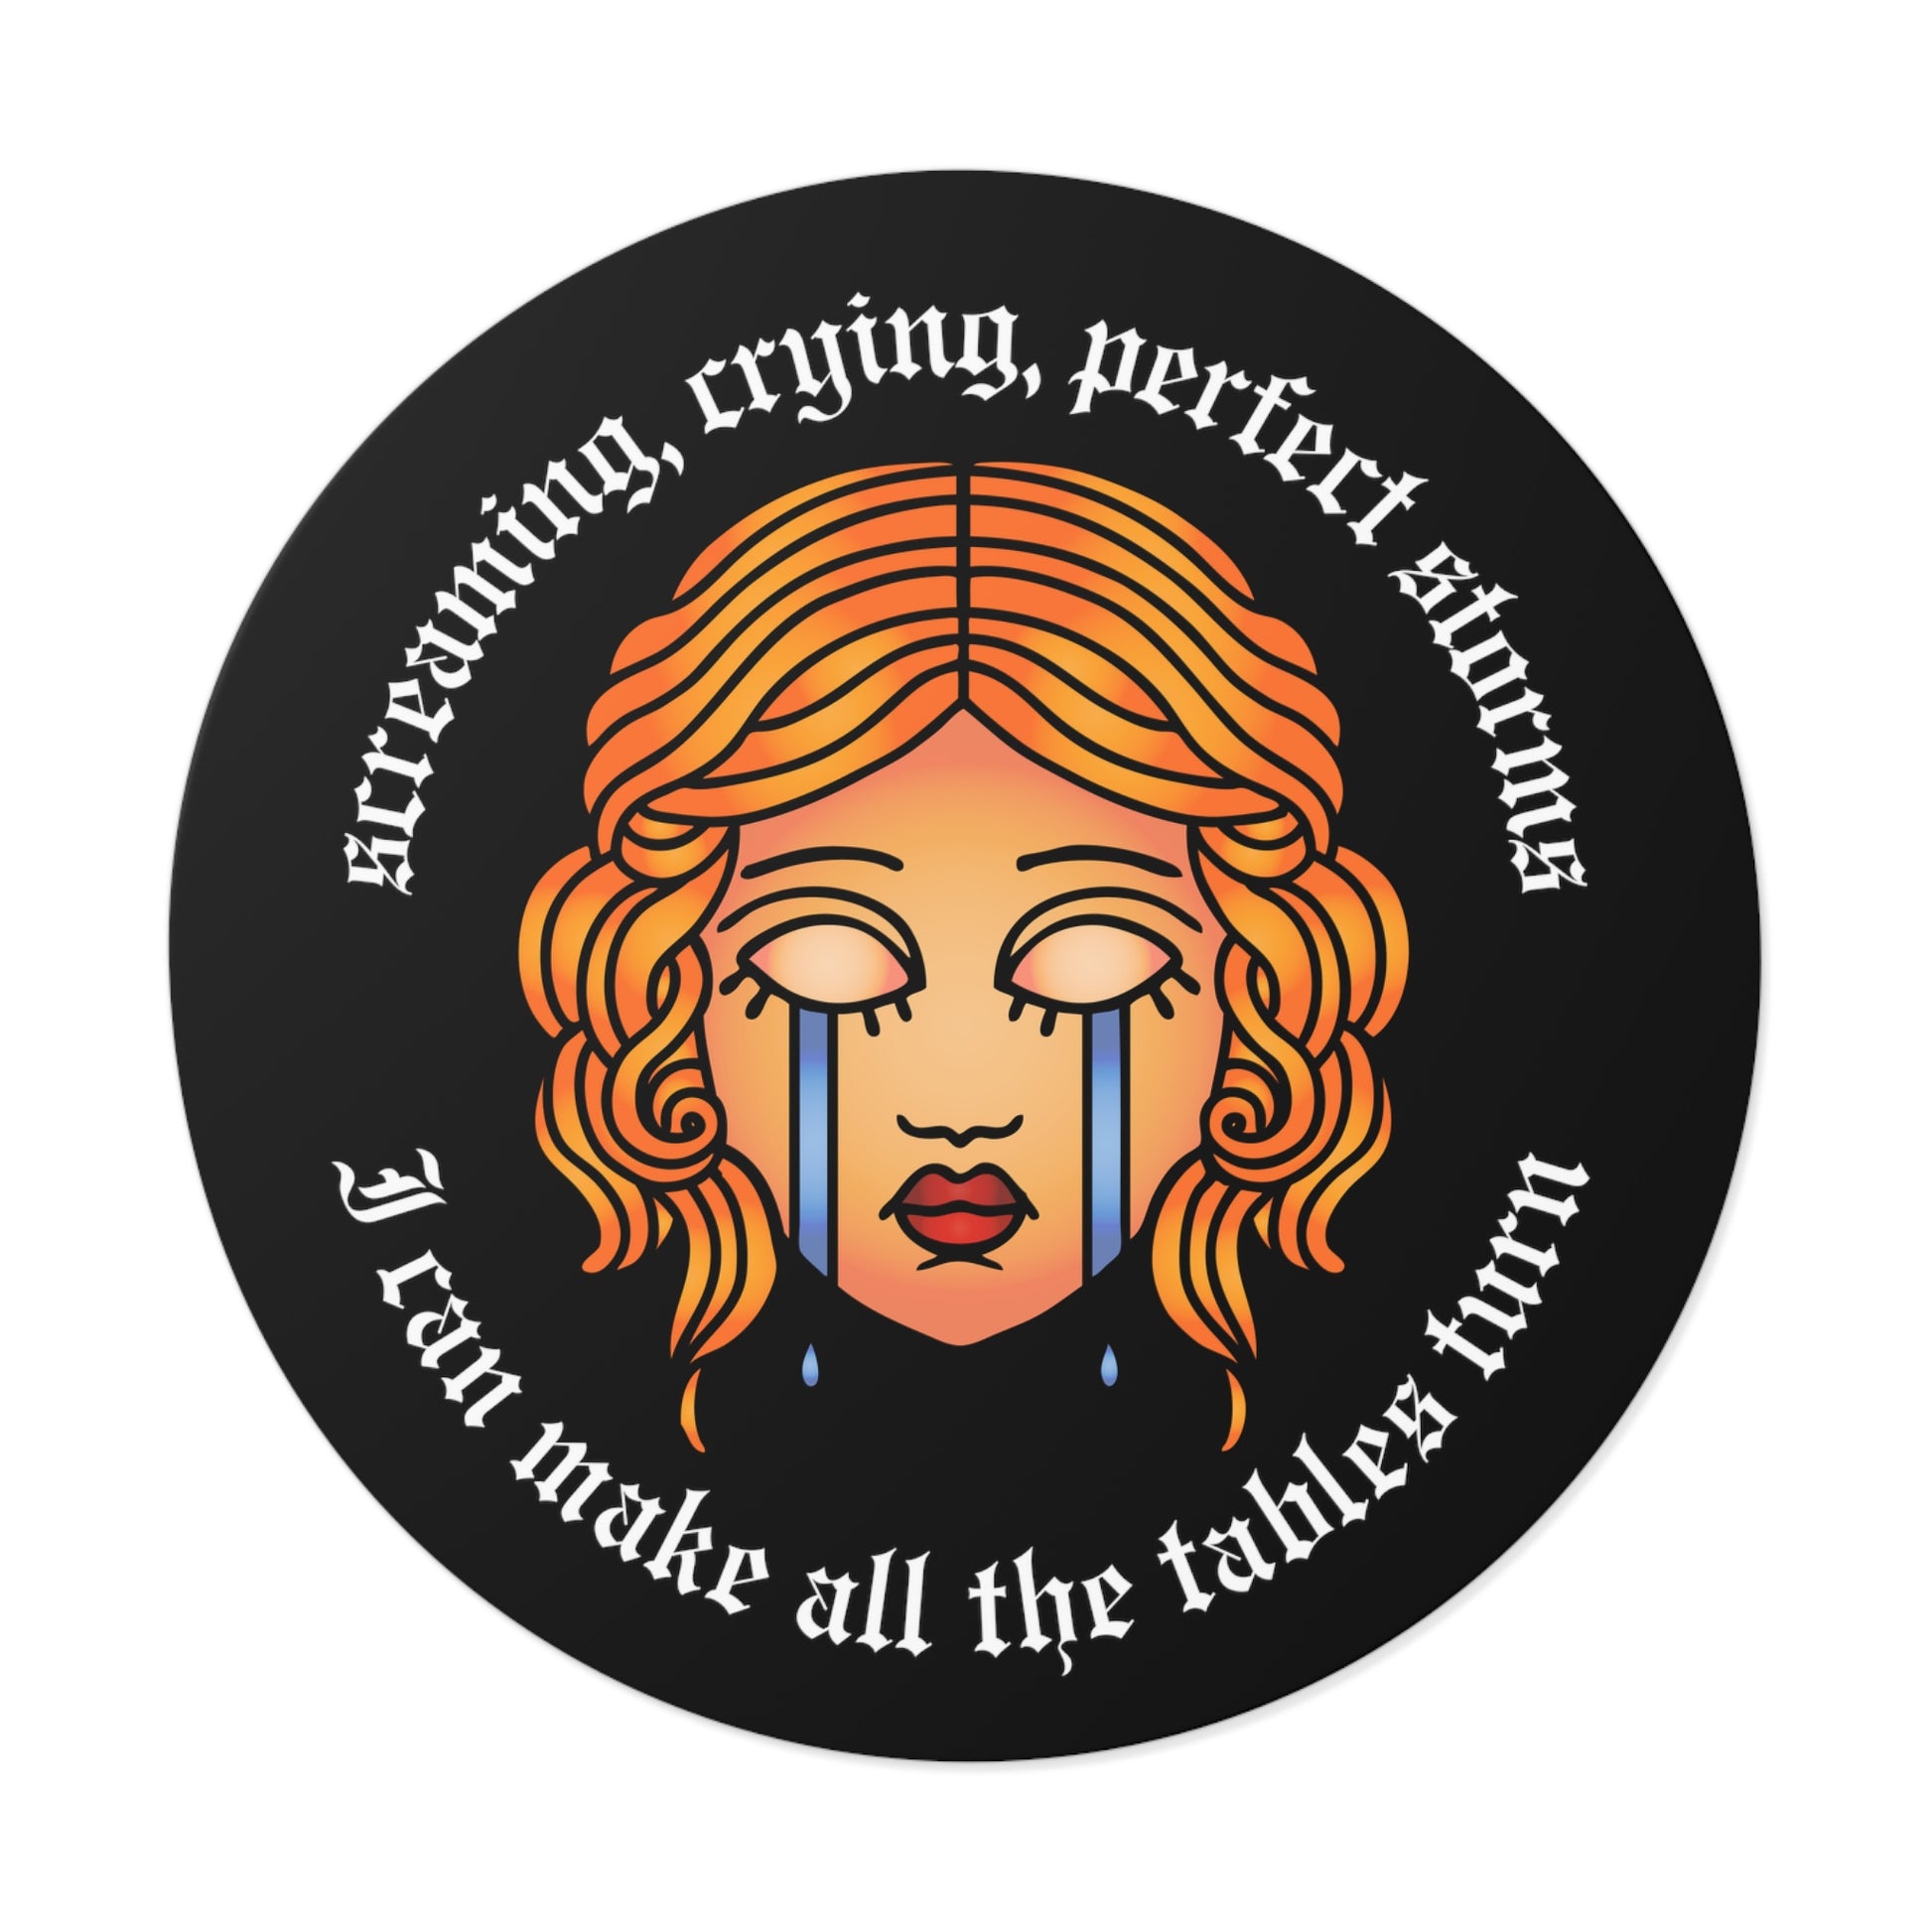 Blank Space 'screaming crying perfect storm' Round Vinyl Black Stickers -  1989